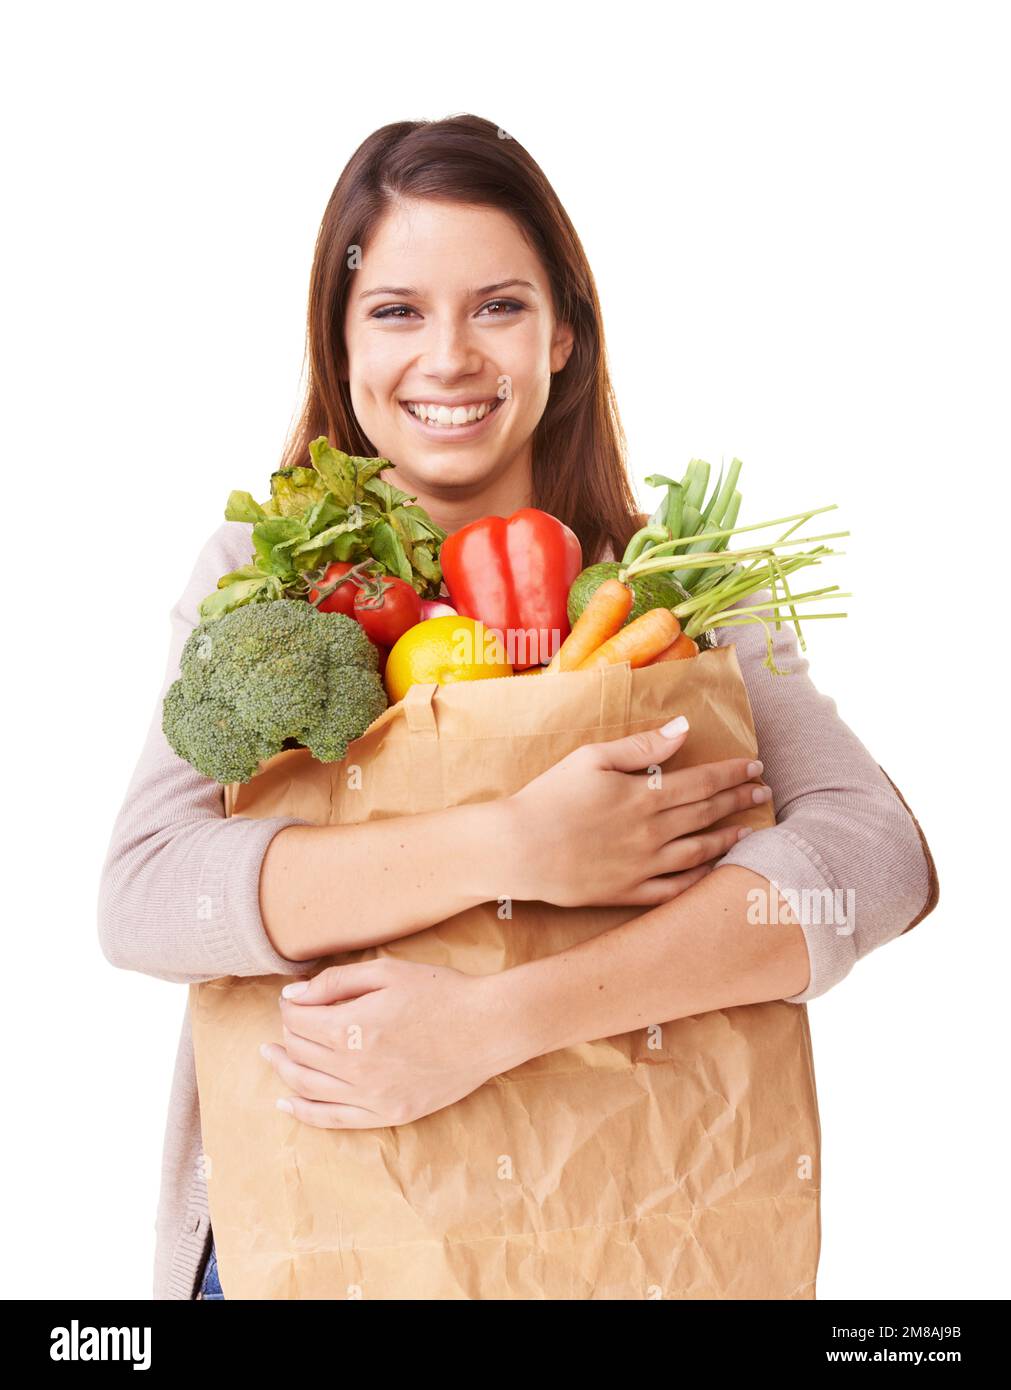 https://c8.alamy.com/comp/2M8AJ9B/she-loves-shopping-for-vegetables-portrait-of-an-attractive-young-woman-holding-a-bag-of-groceries-2M8AJ9B.jpg